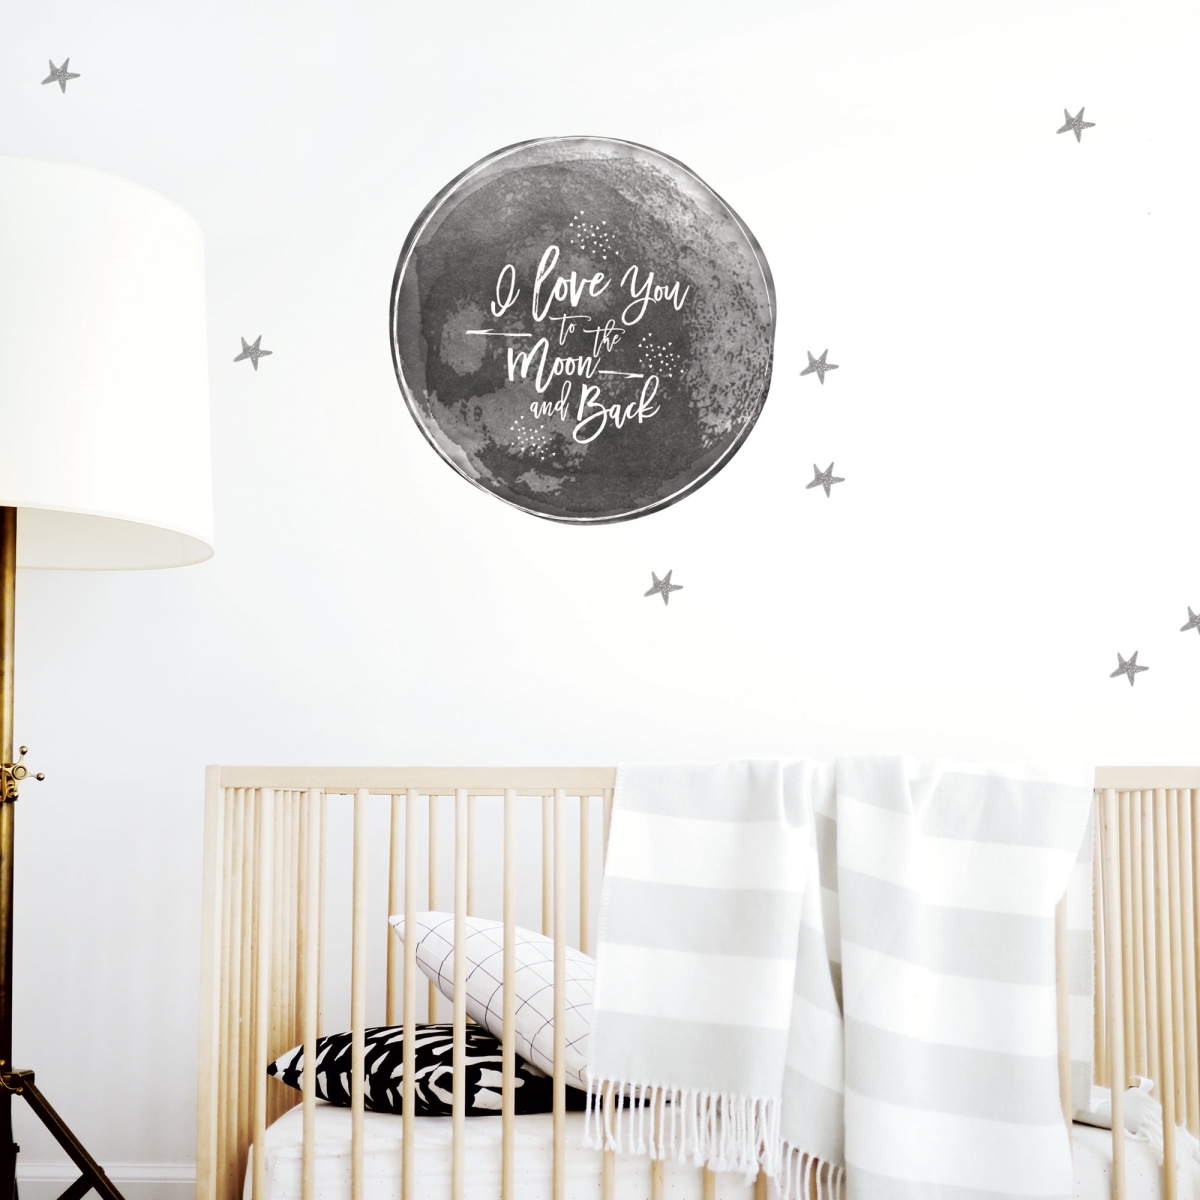 Wd-ttm-1 To The Moon & Back Wall Decal - Mix Of Gray With White